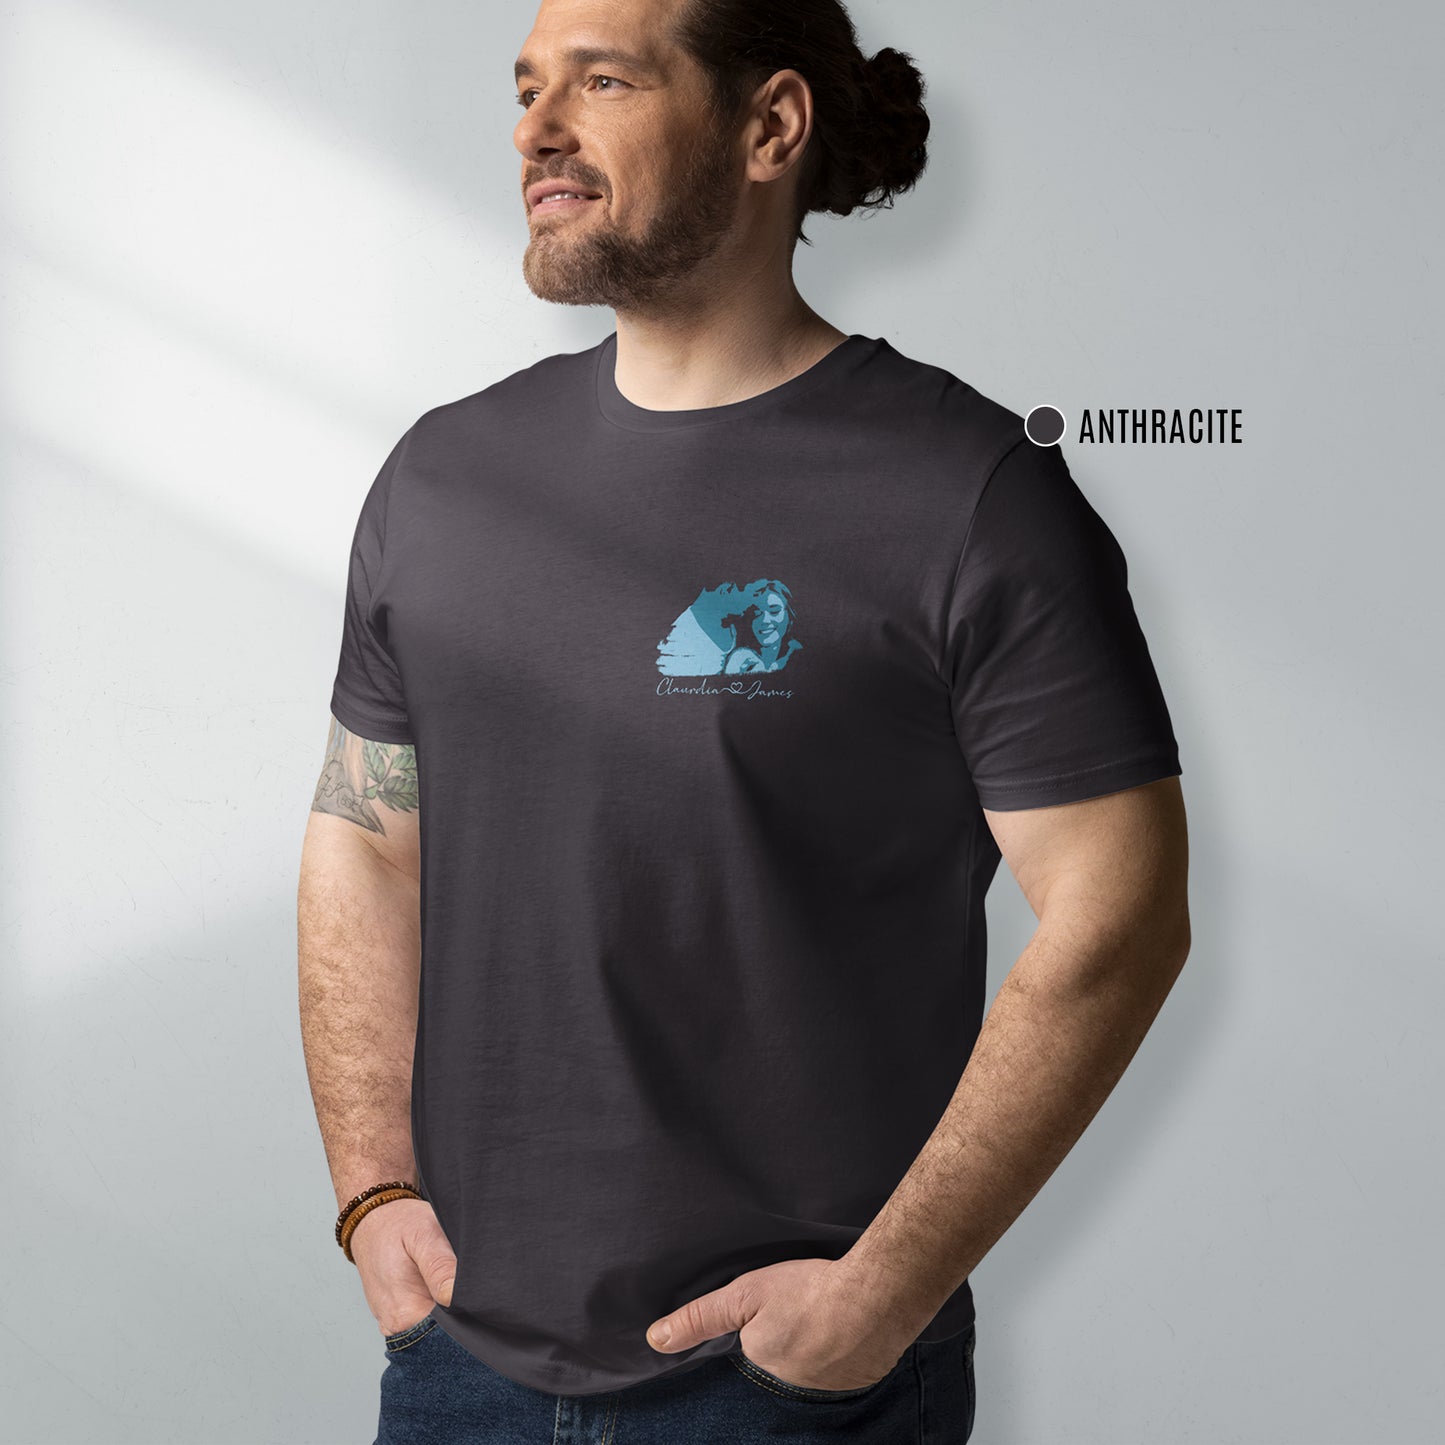 Personalized Men's T-Shirt in Anthracite  - Small Portrait in Blue | Seepu